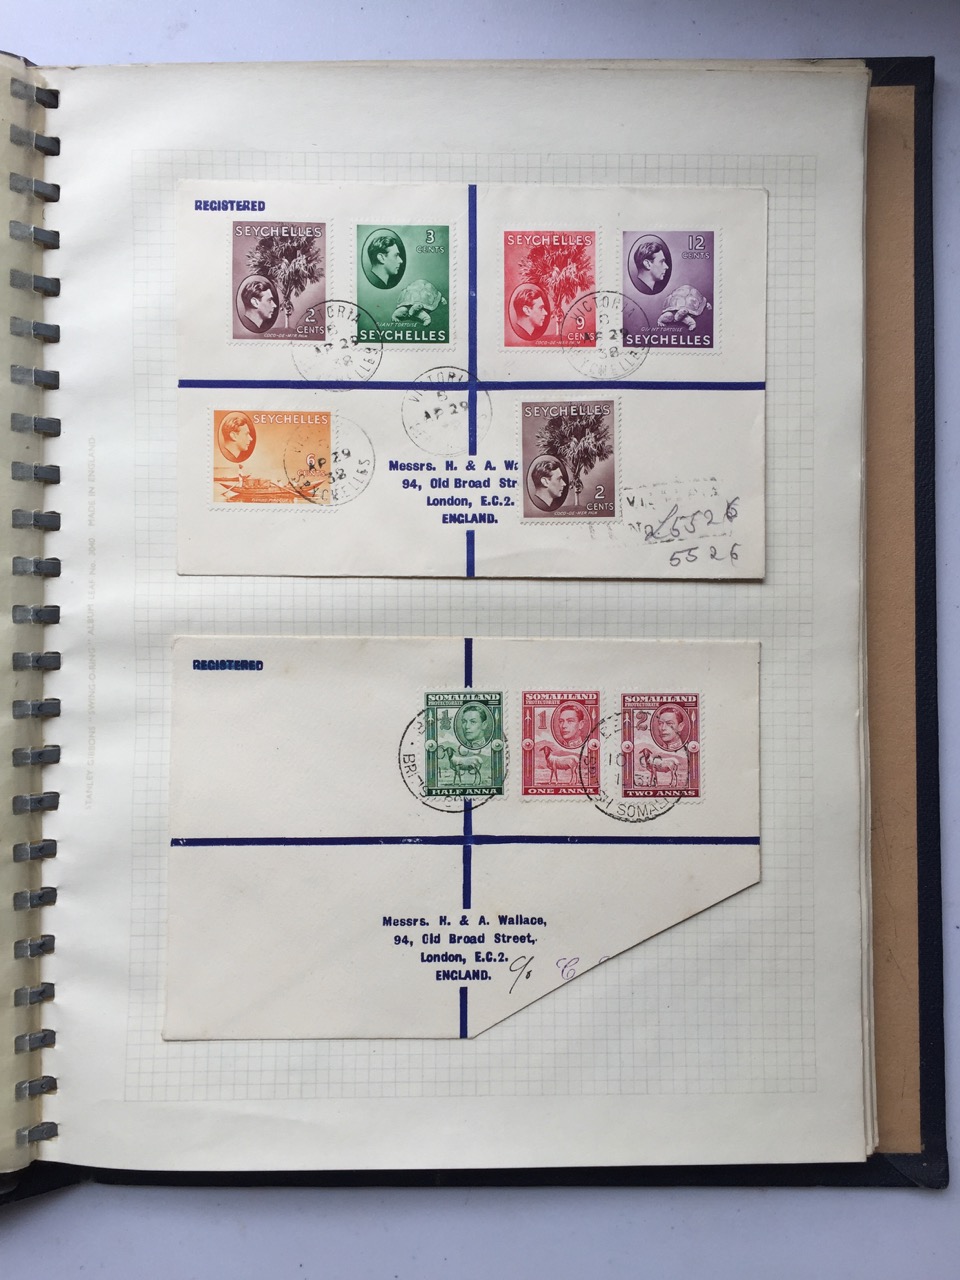 A vintage Stanley Gibbons 'Swing-O-Ring' stamp album containing a British Commonweath